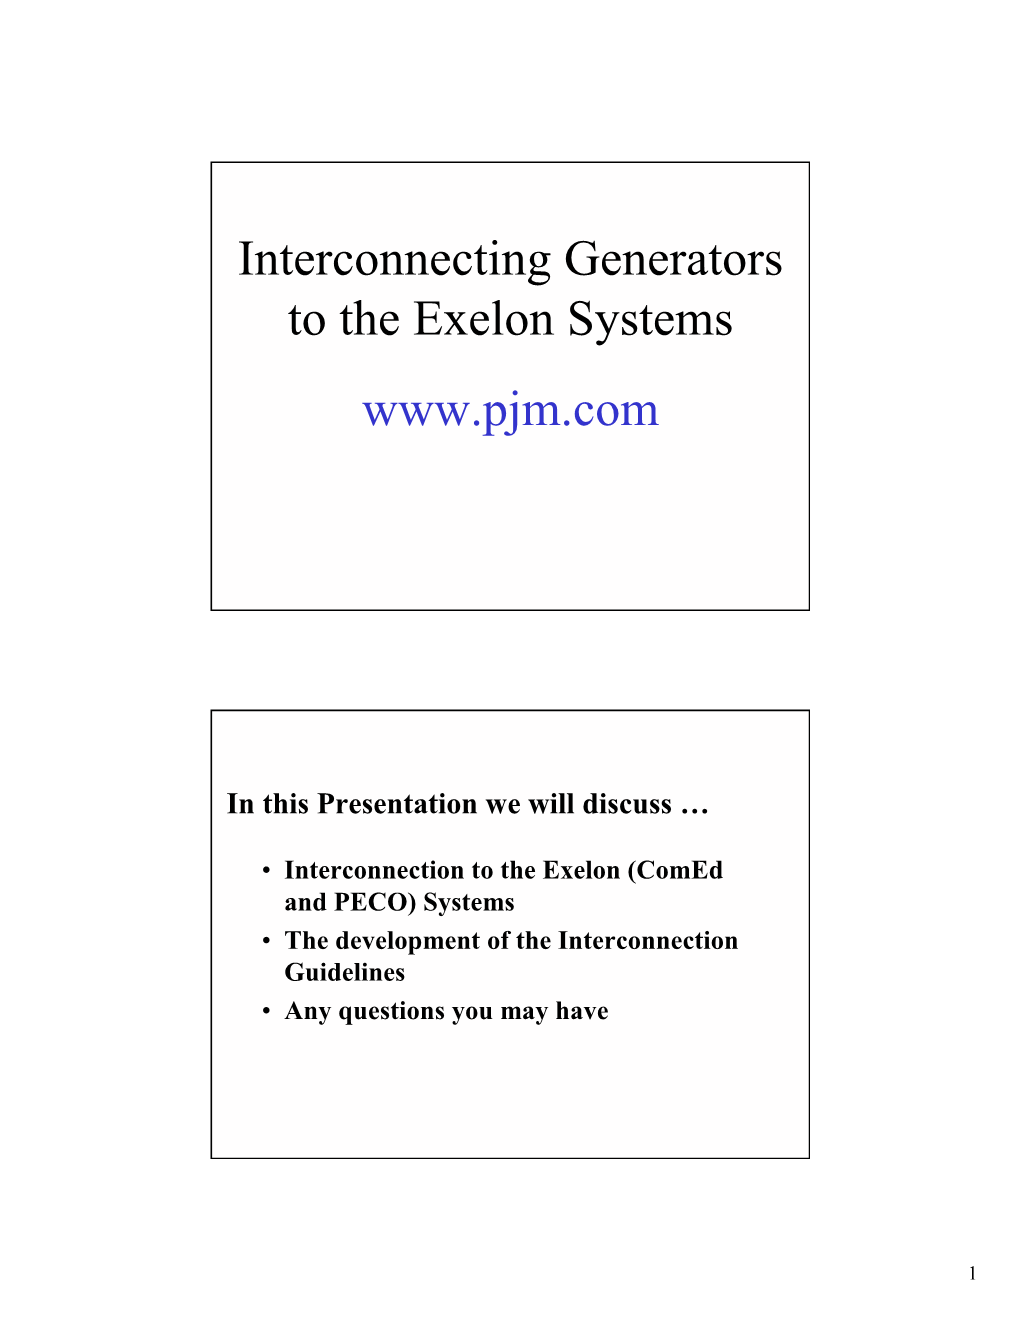 Interconnection to the Exelon (Comed and PECO) Systems • the Development of the Interconnection Guidelines • Any Questions You May Have